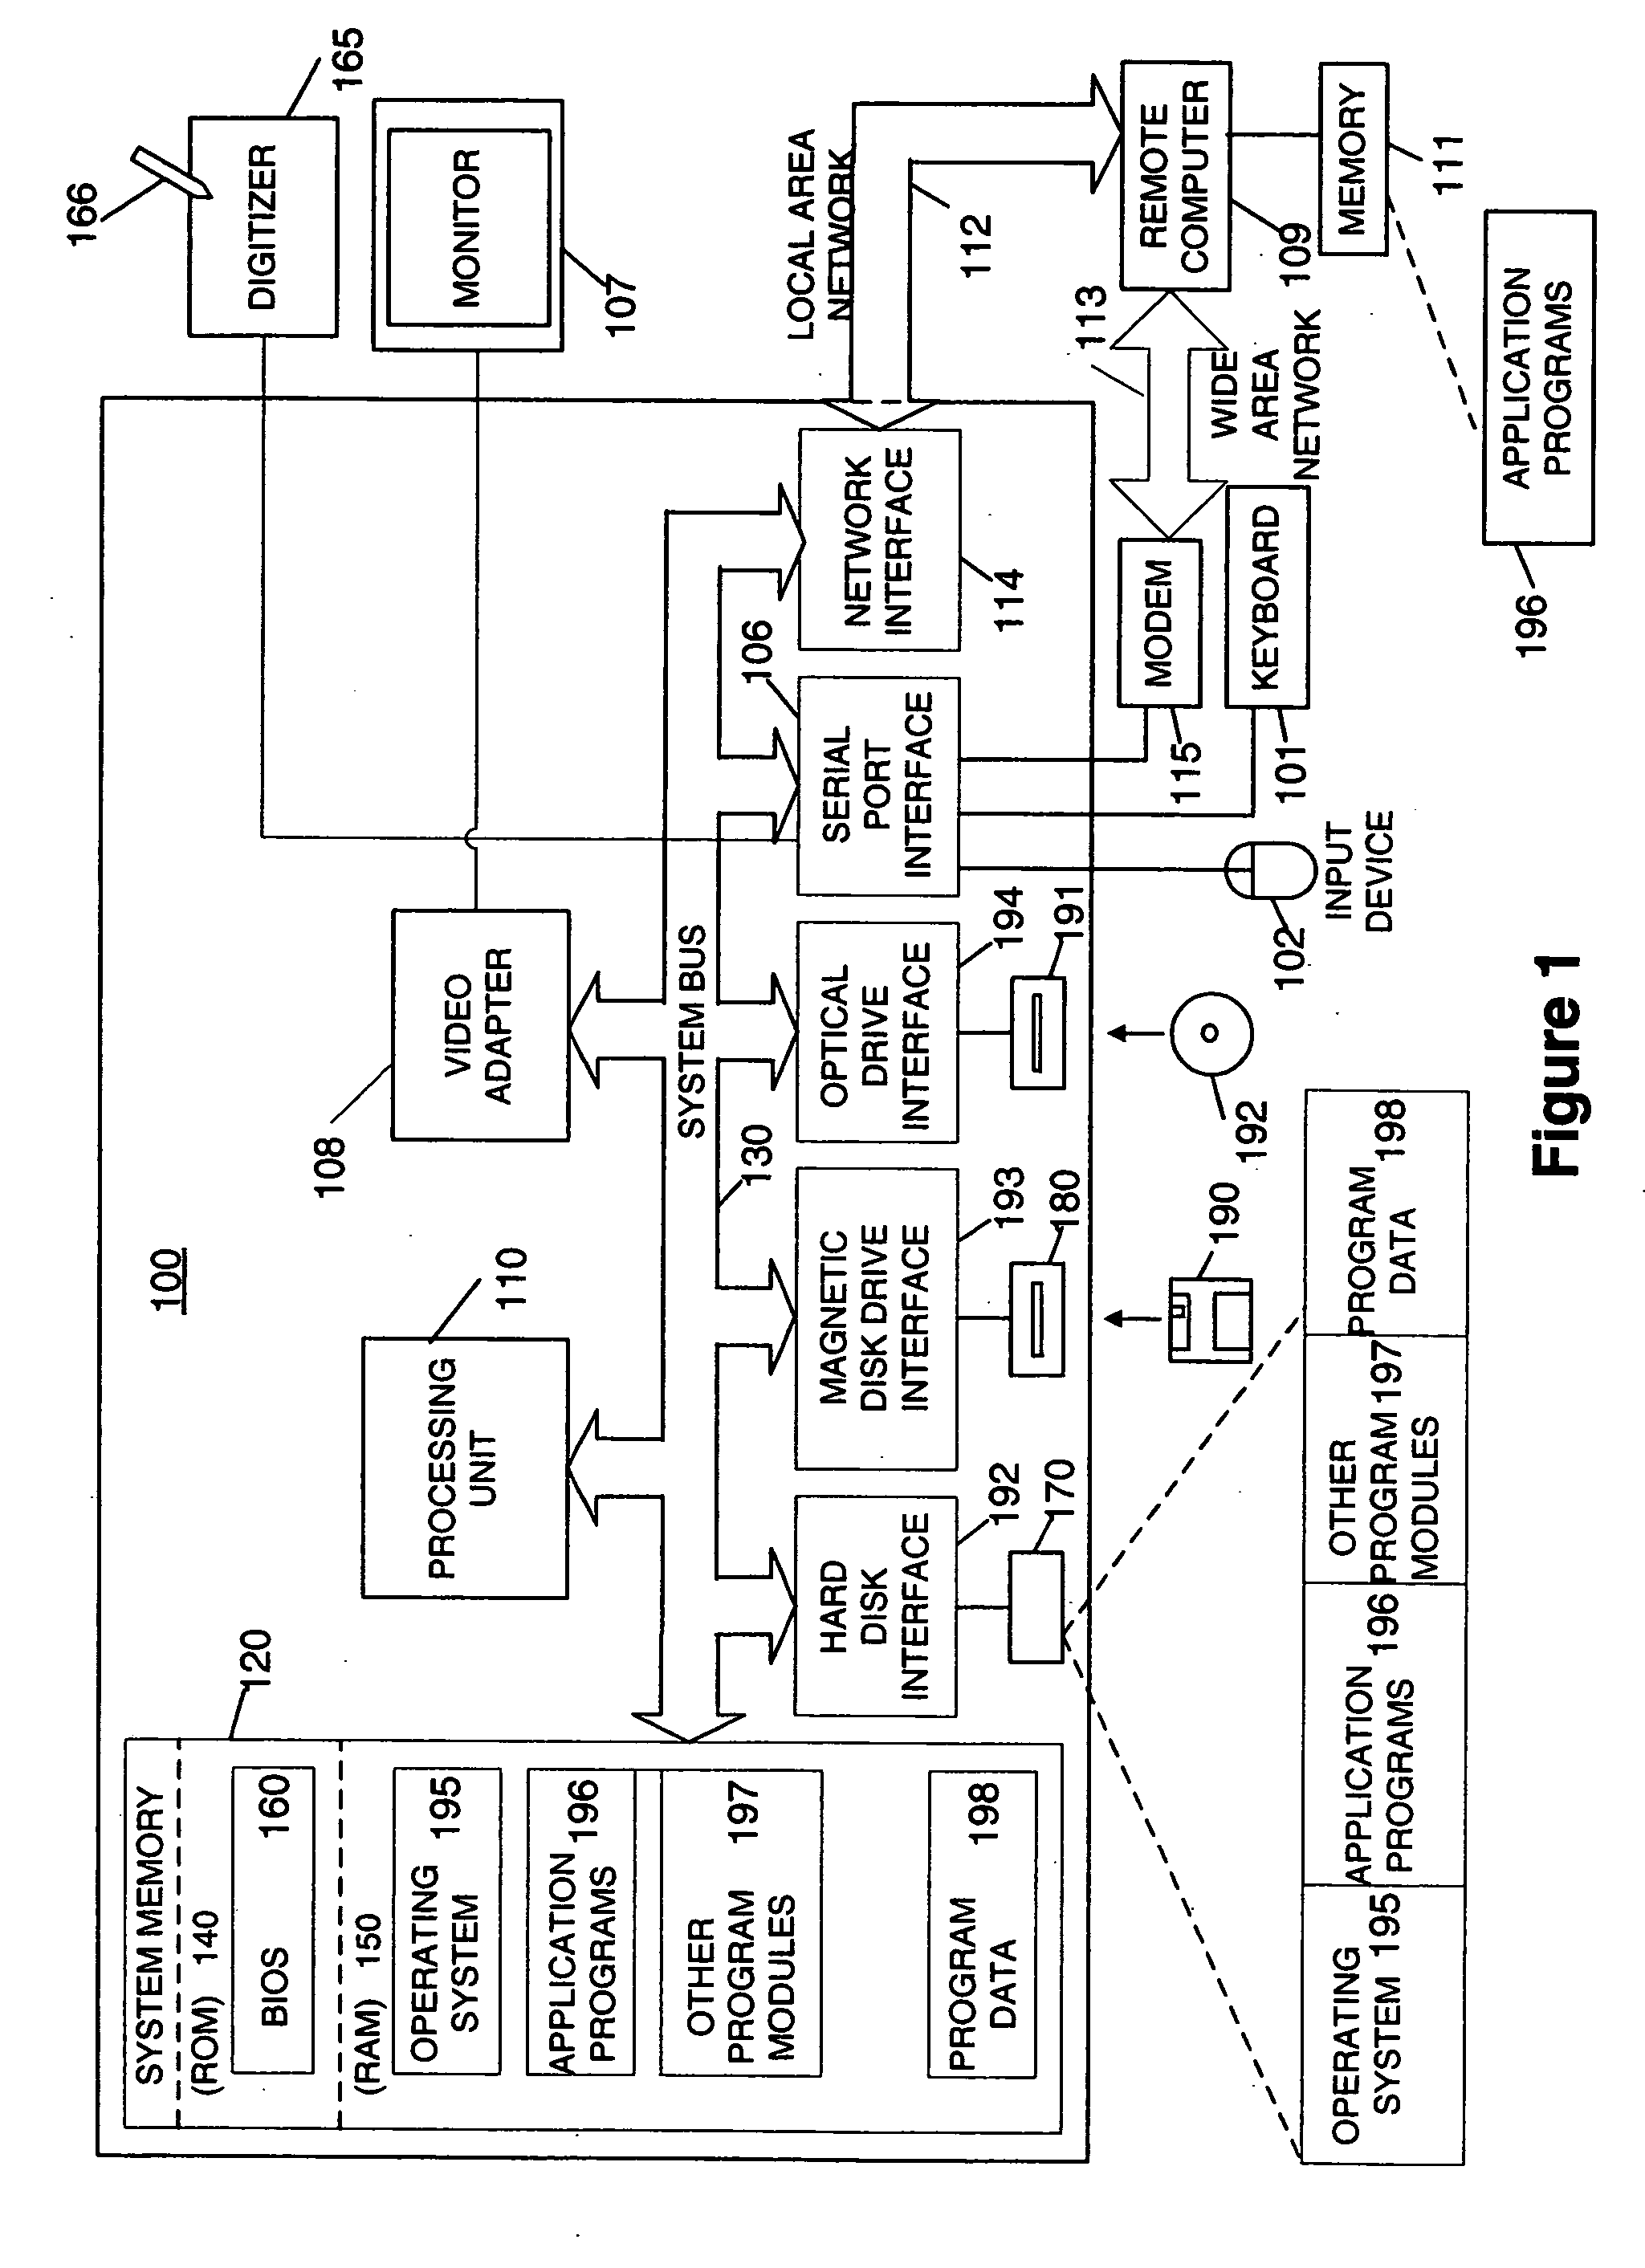 Directional input device and display orientation control